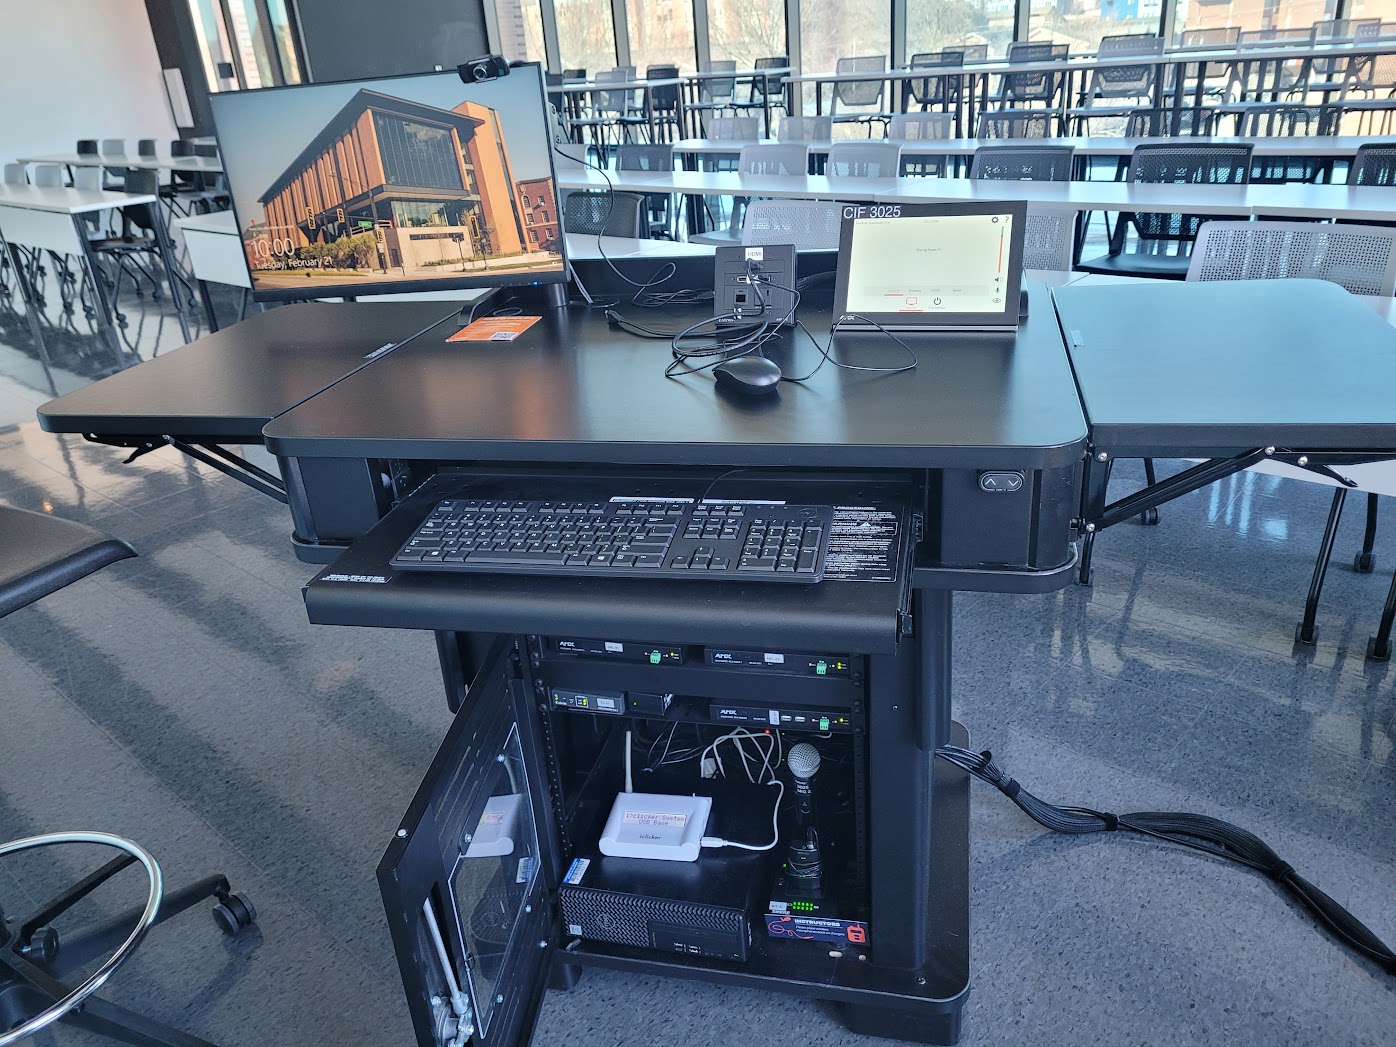 The instructor lectern with the control panel, keyboard, mouse, and monitor on top and the PC, microphones, and sound equipment.